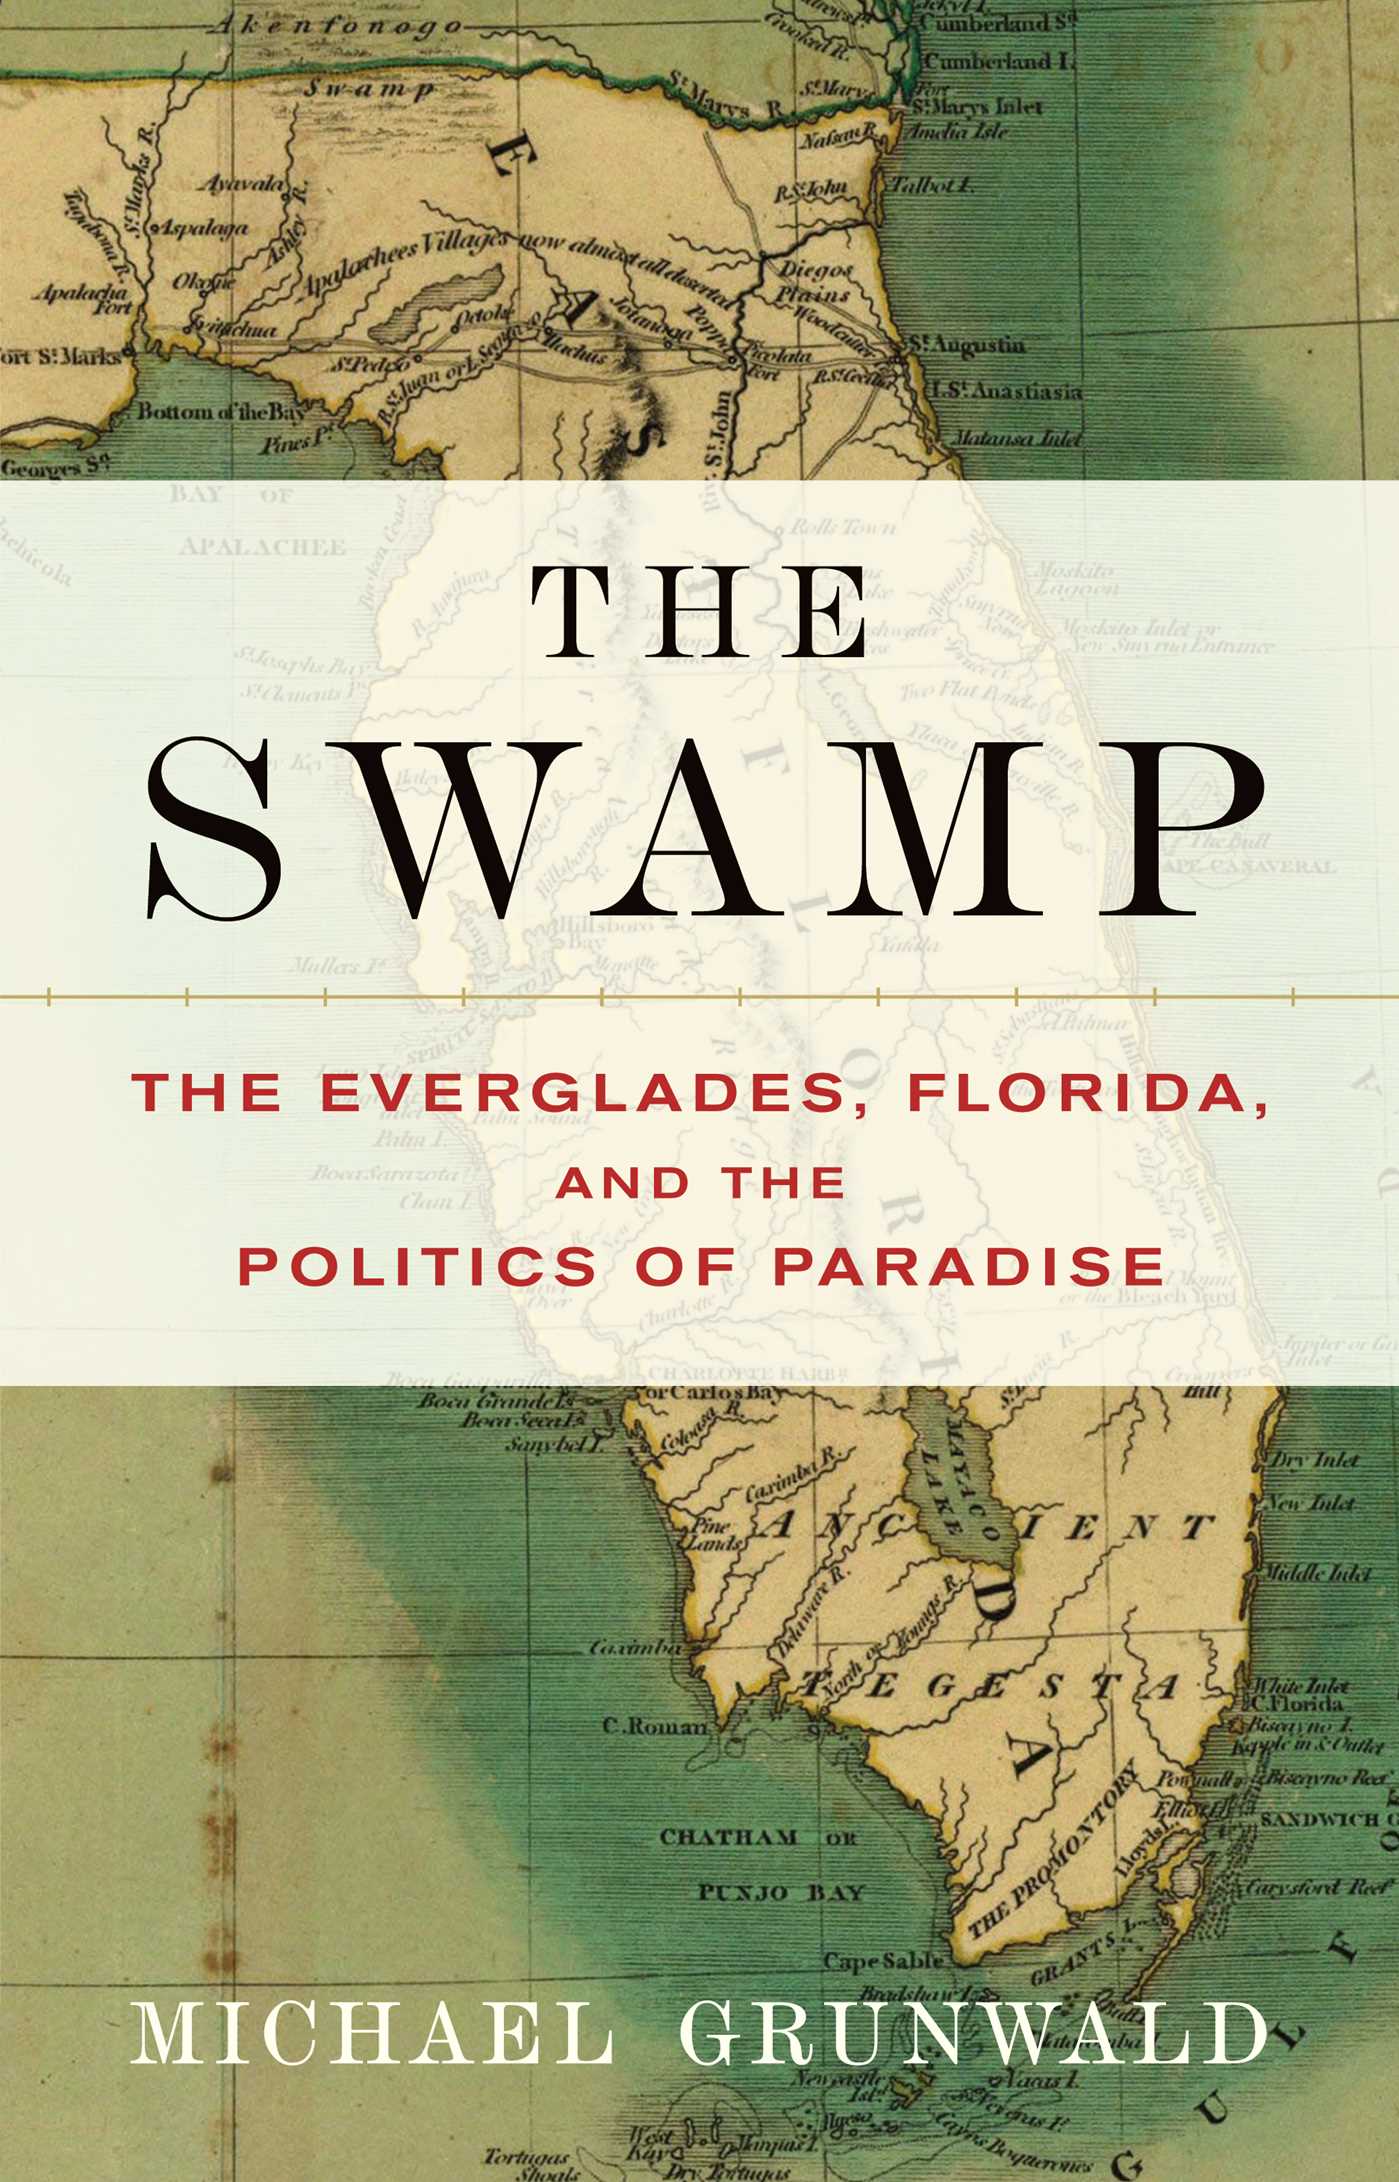 Umschlagbild für The Swamp [electronic resource] : The Everglades, Florida, and the Politics of Paradise